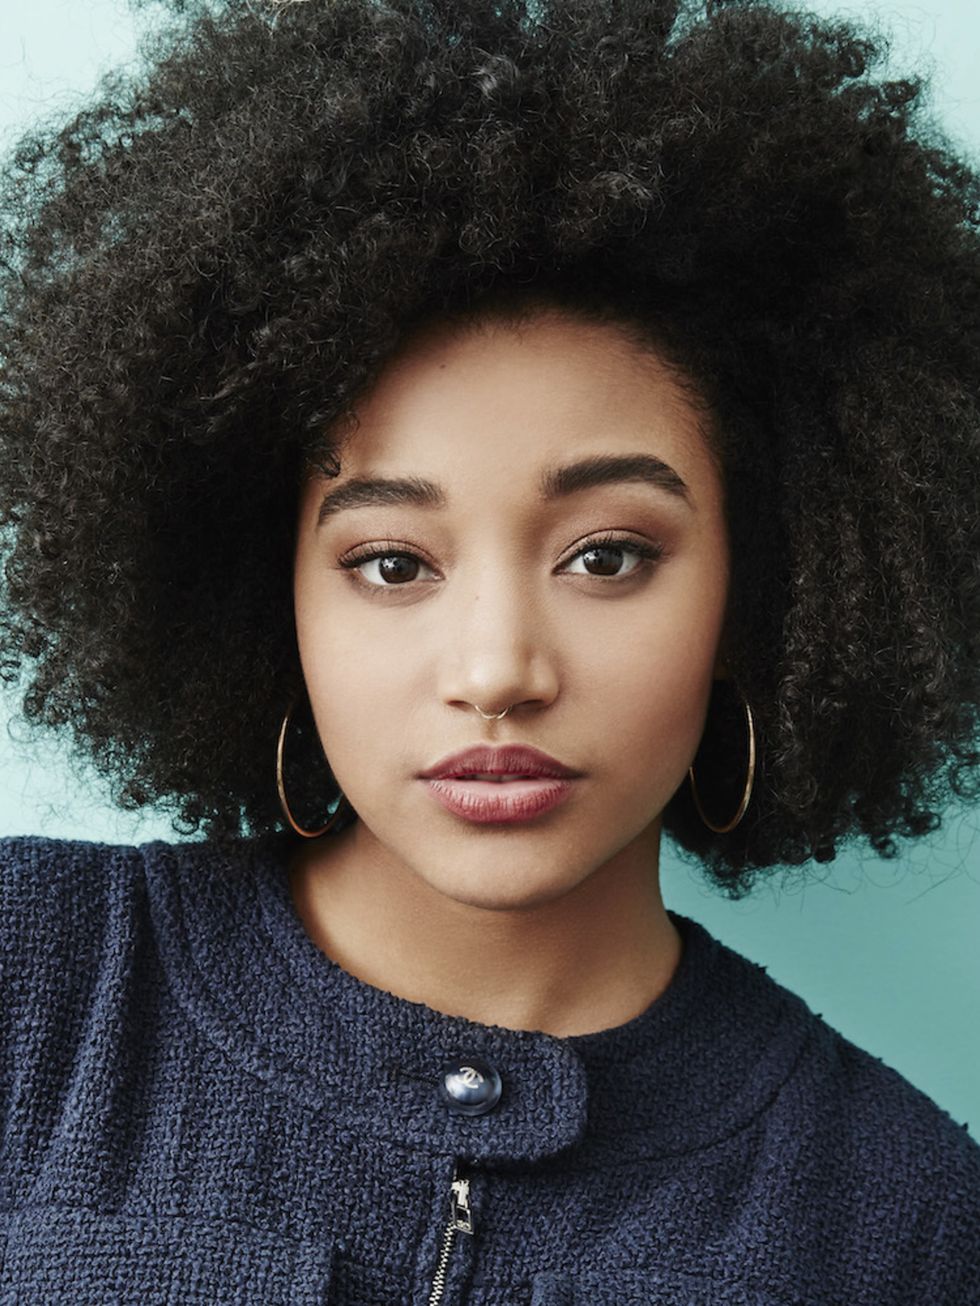 <p><strong>Amandla Stenberg </strong></p>

<p>Amandla Stenberg, best known for her portrayal of Rue in The Hunger Games, is an American actress who has been applauded for her comments on the struggles faced by black, bisexual women. In a series of snapcha